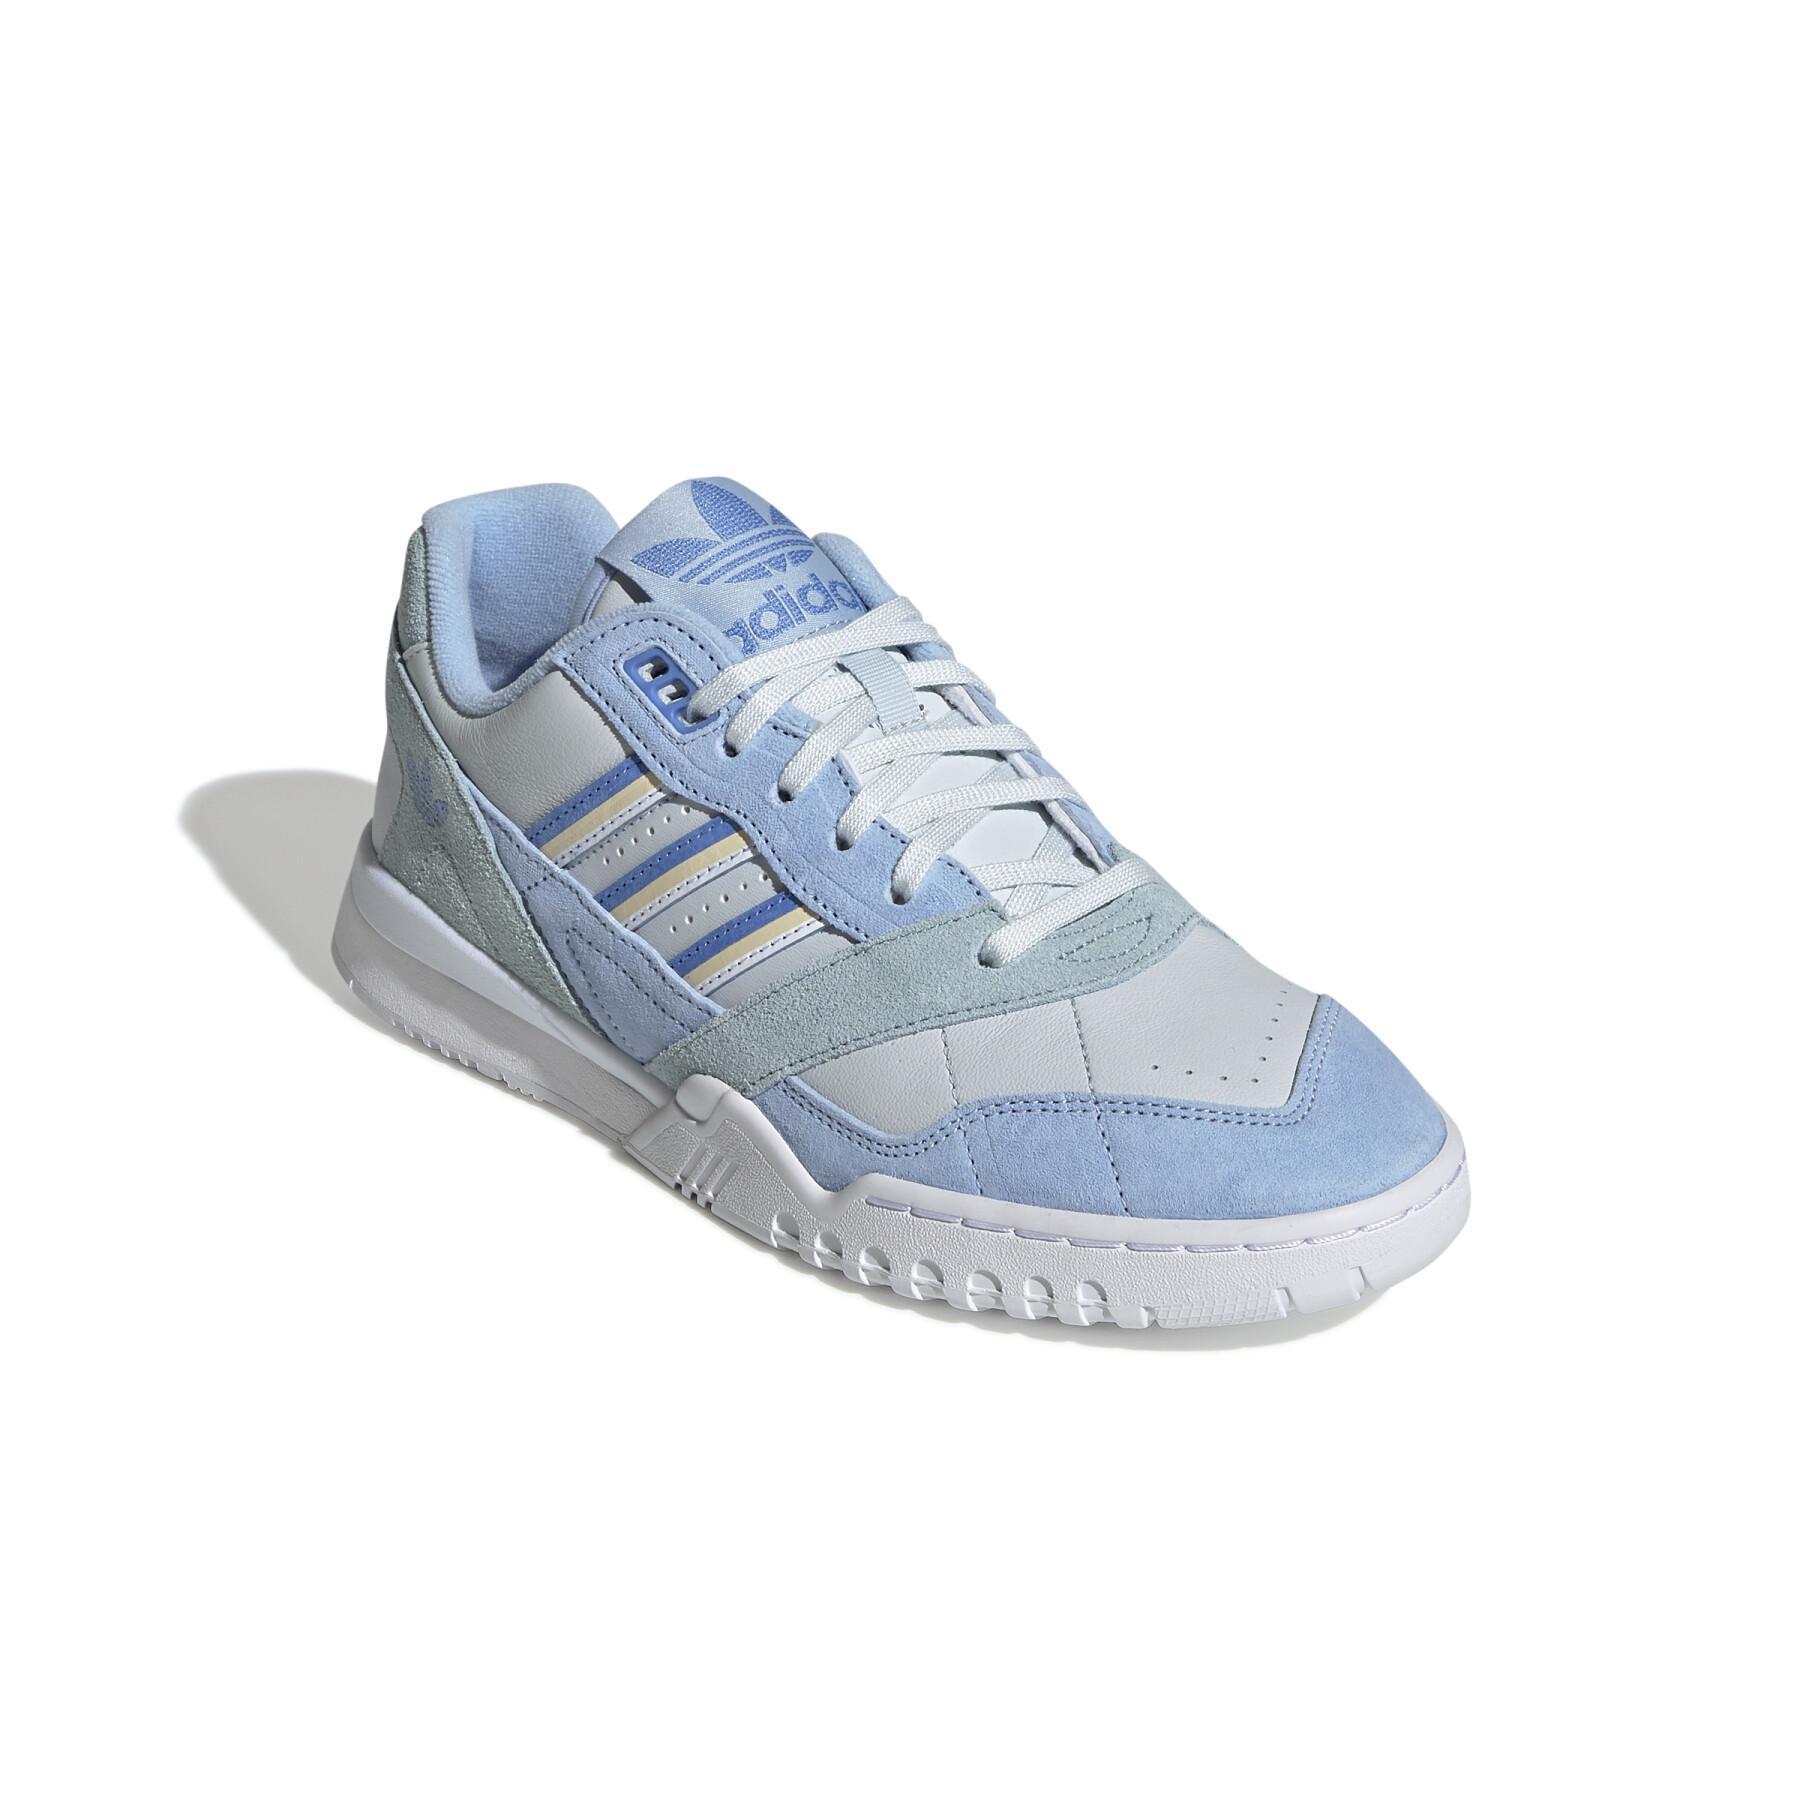 adidas A.R. Trainer Women's Sneakers